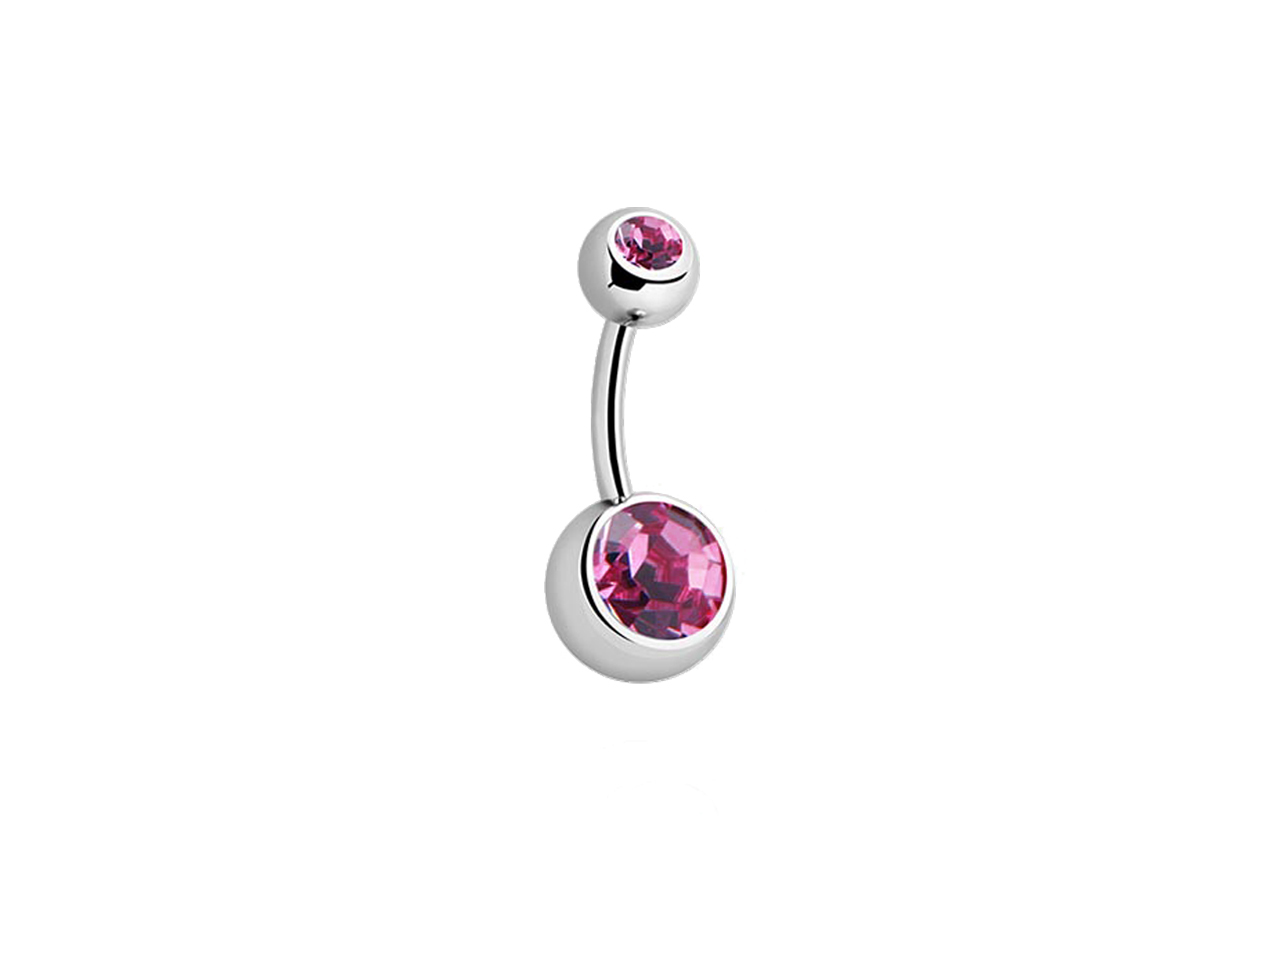 Highly Polished Titanium Double Gem Navel Bars - Tribal Voice: Piercings